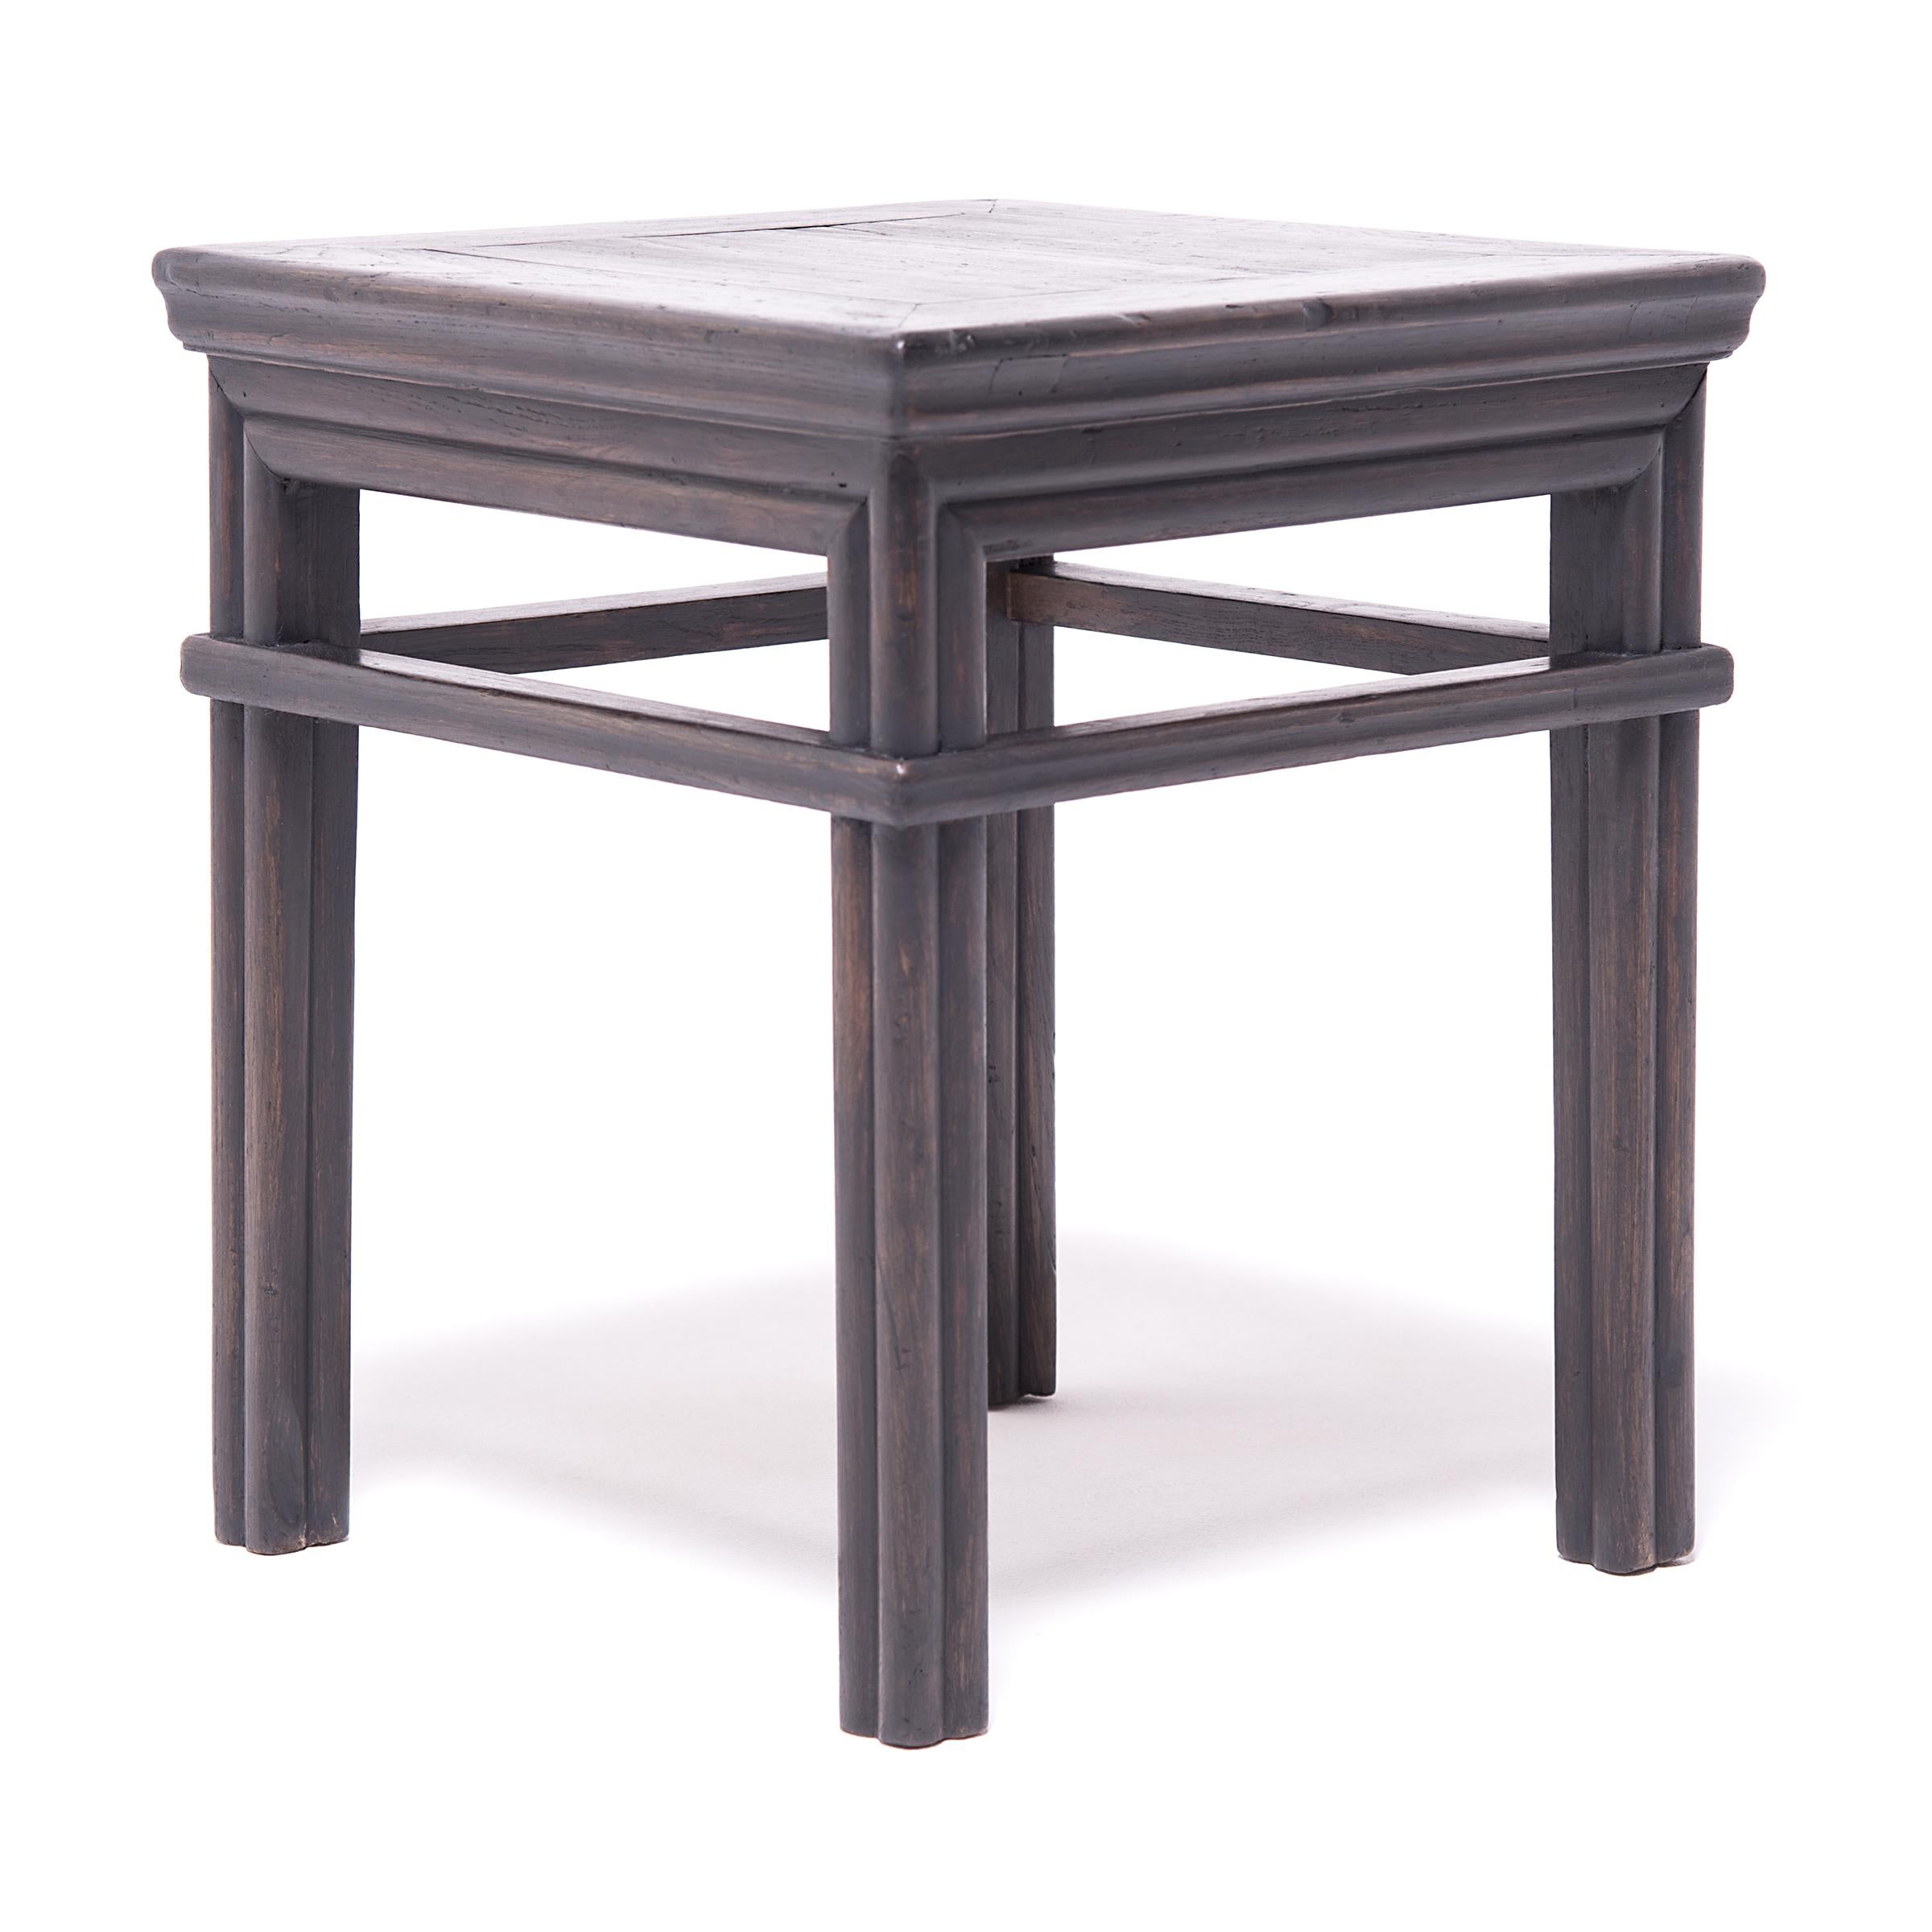 This form of square stool, or fang deng, was a versatile seating option and was pulled up for use at mealtimes or used outdoors in a courtyard or garden. The pair is expertly crafted of northern elm (yumu) with mortise-and-tenon joinery and a dark